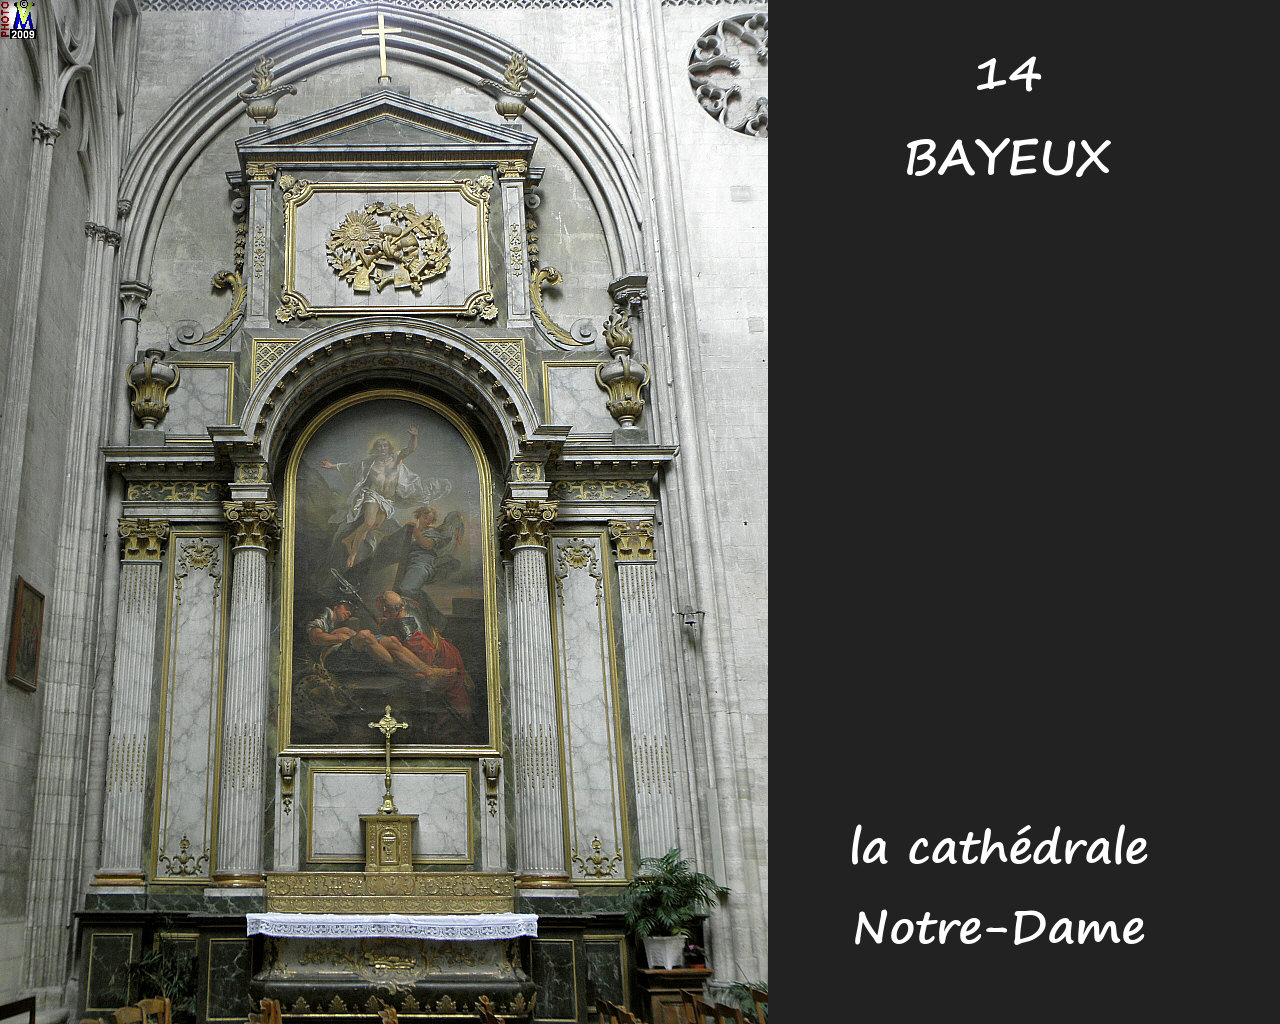 14BAYEUX_cathedrale_234.jpg